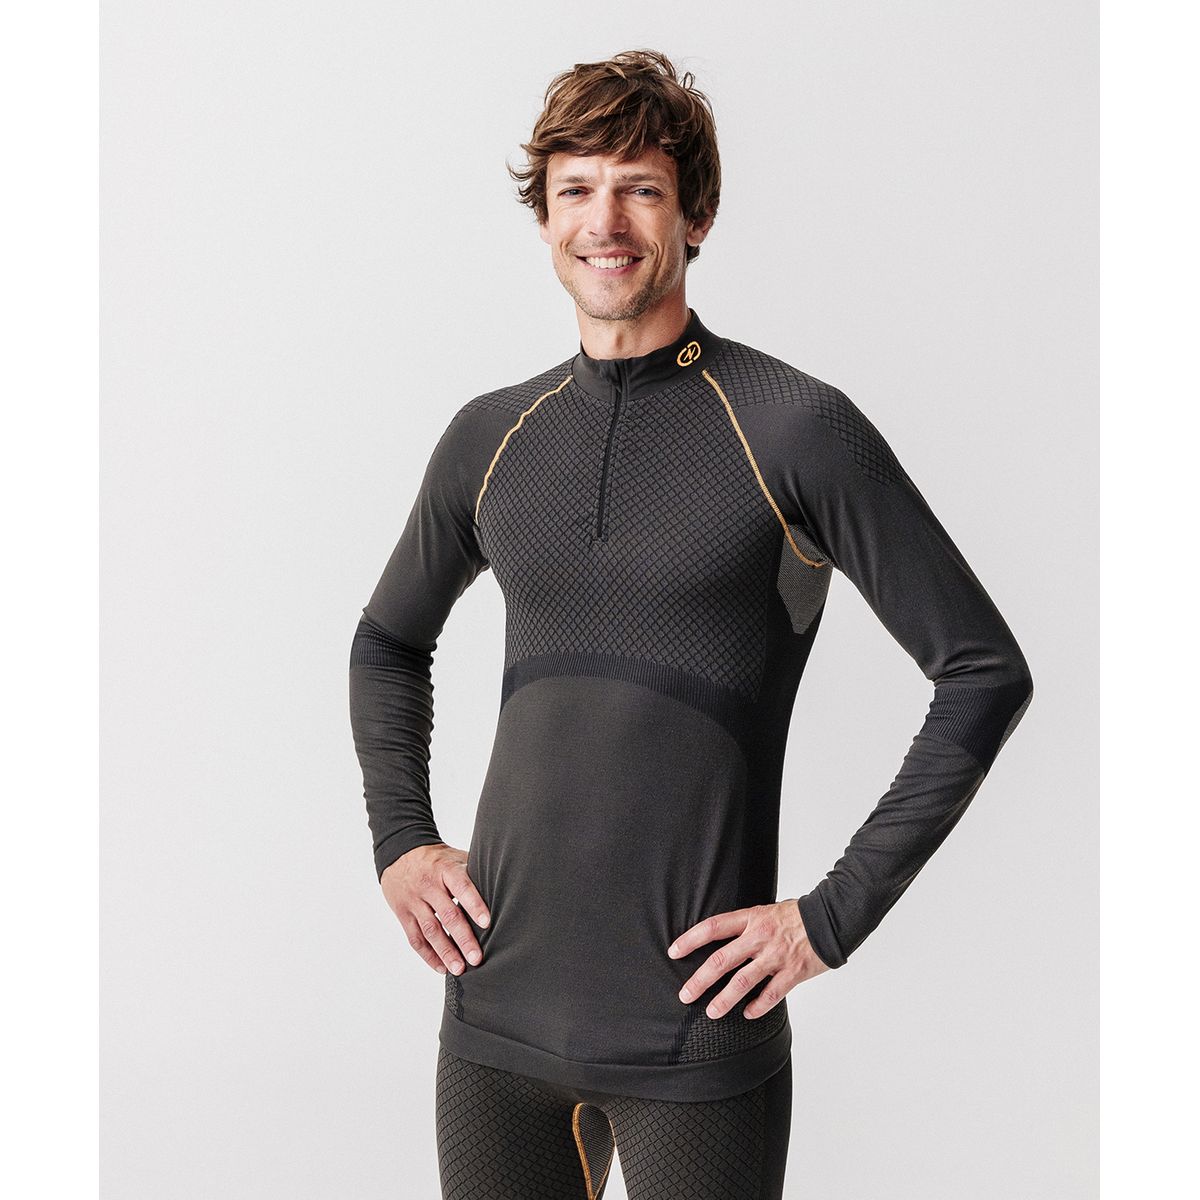 Damart Sport Collant Activ Body 2 Thermolactyl Homme 